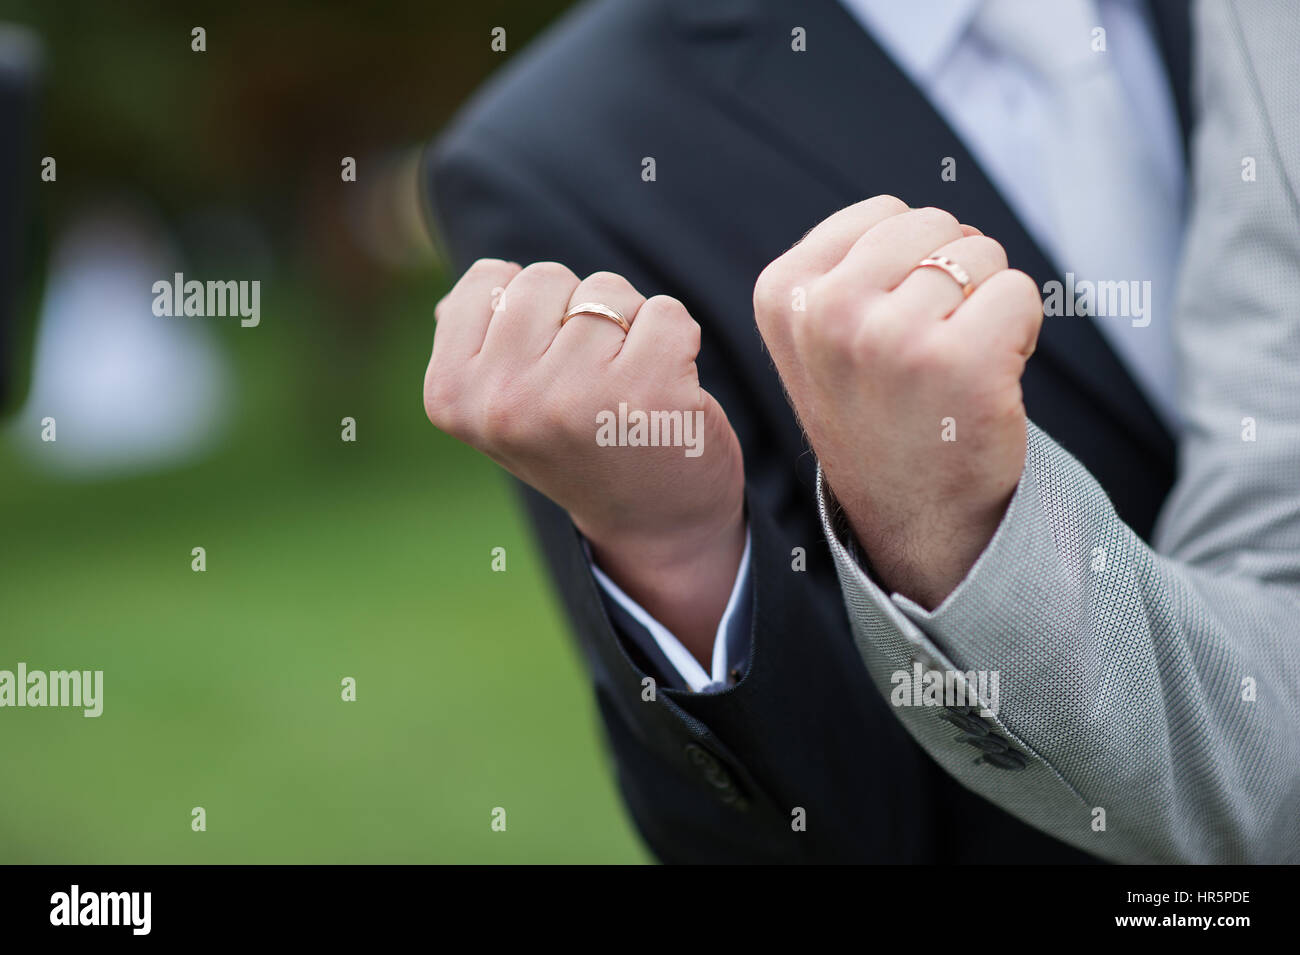 two male fist with wedding gold rings. Stock Photo